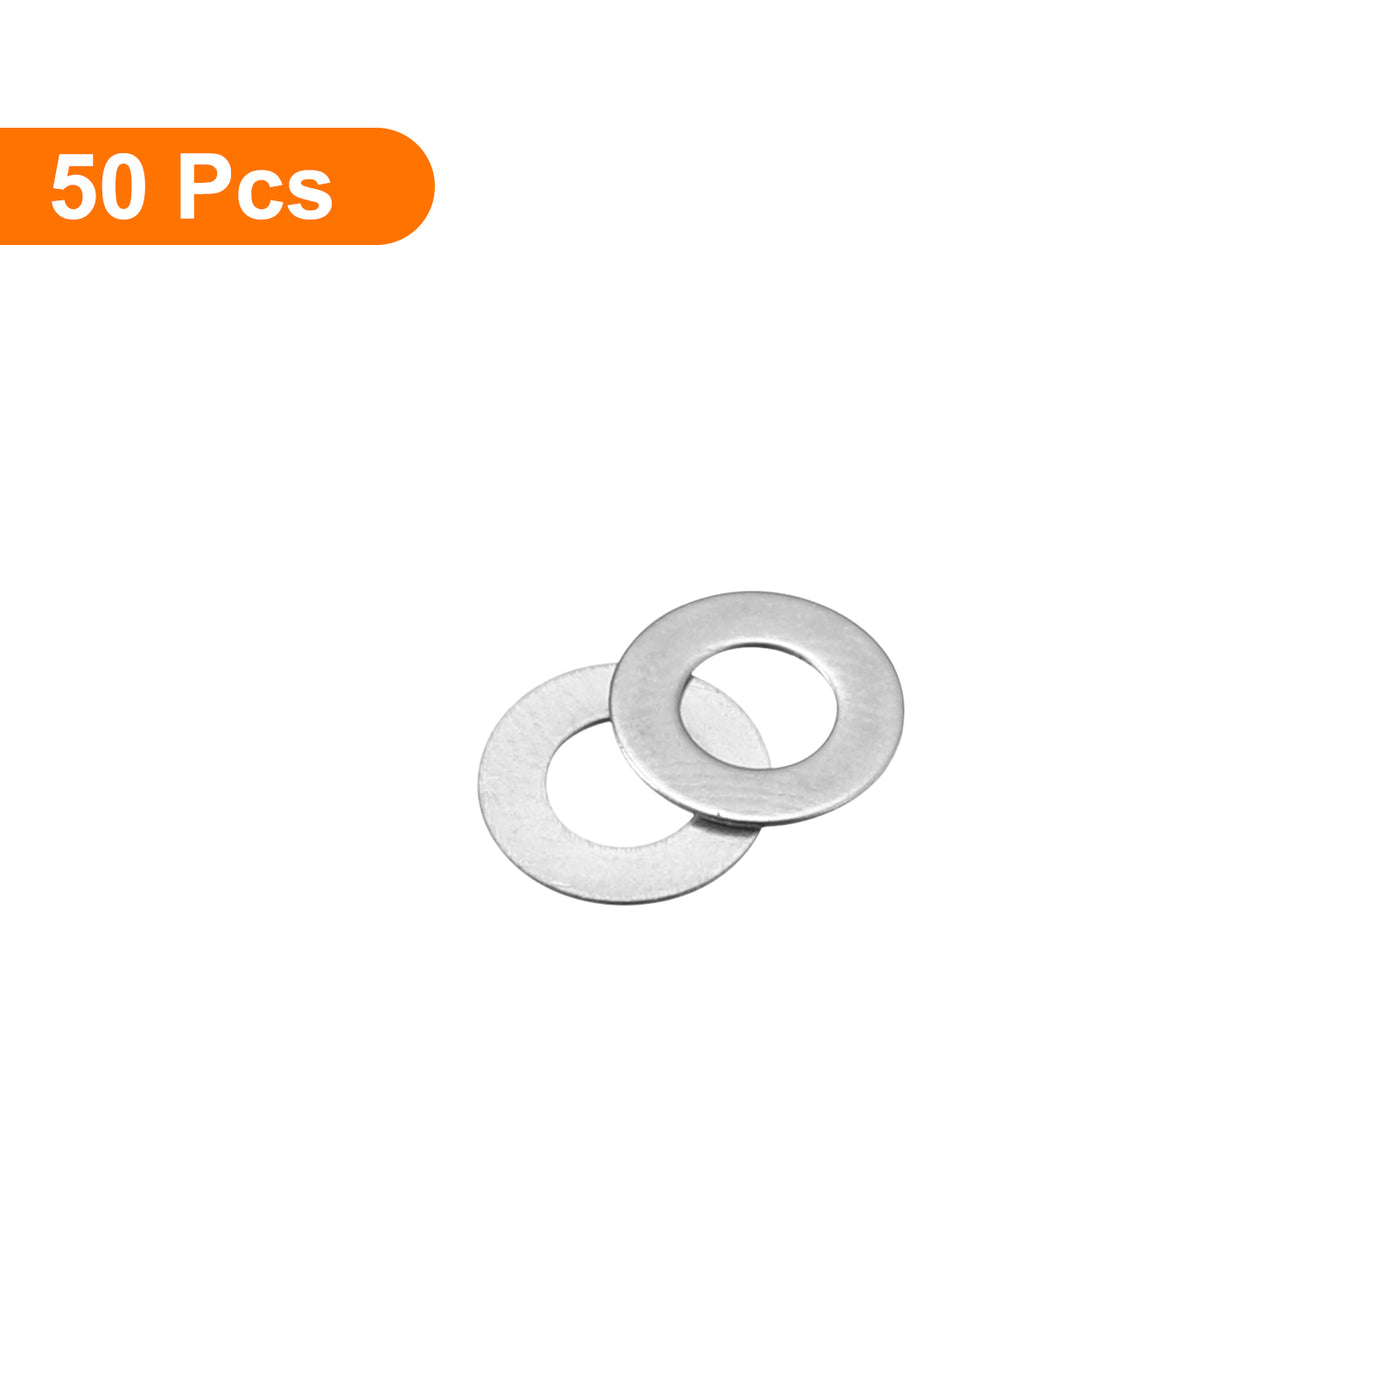 uxcell Uxcell M4 304 Stainless Steel Flat Washers, 50pcs 4x8x0.3mm Ultra Thin Flat Spacers